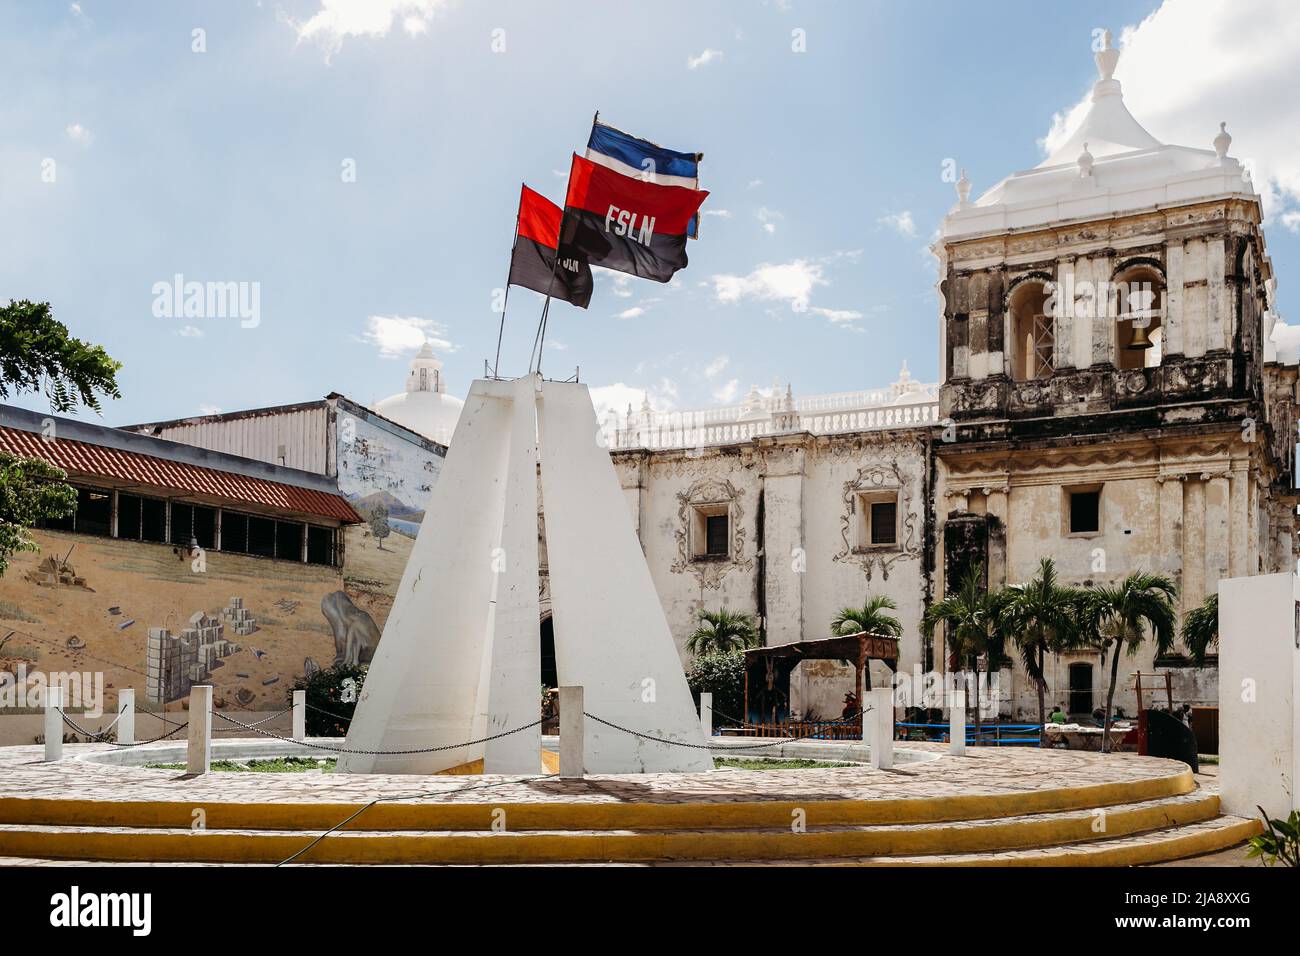 Sandinista Memorial to the Heroes and Martyrs of Leon.White pyramid monument for local heroes with FSLN flag on top - León, Nicaragua Stock Photo